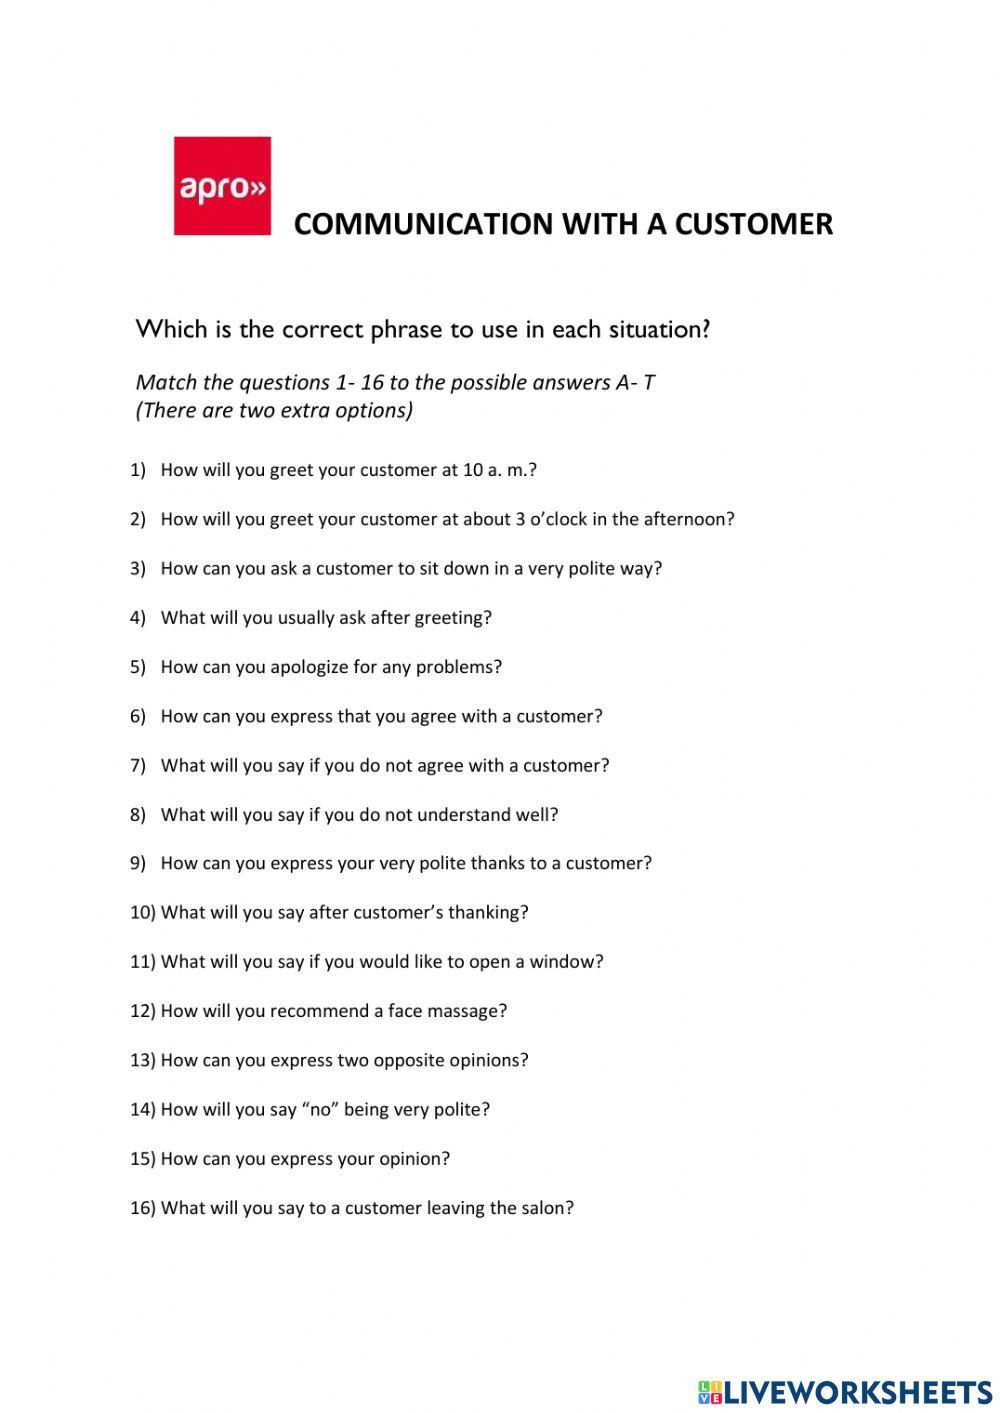 Communication with a customer